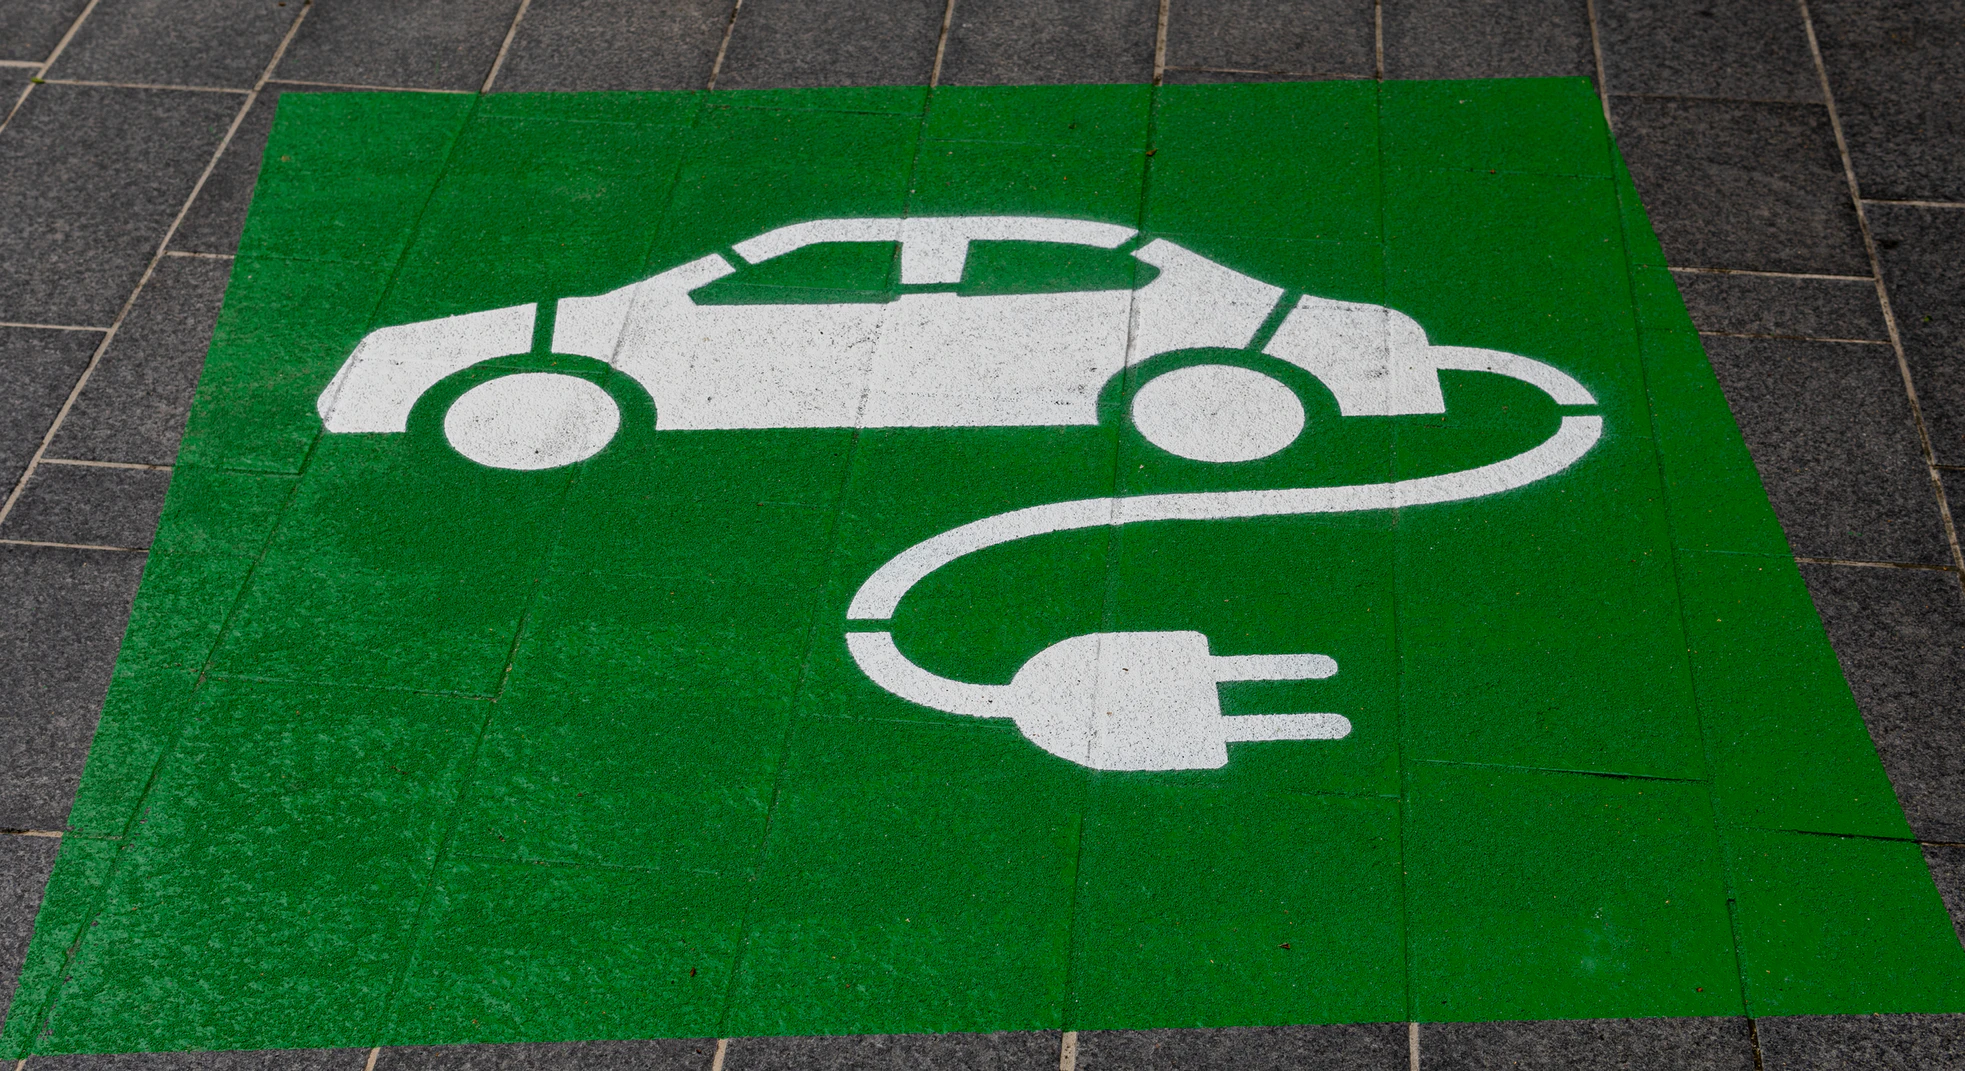 EIB releases contract guide for uptake of electric mobility